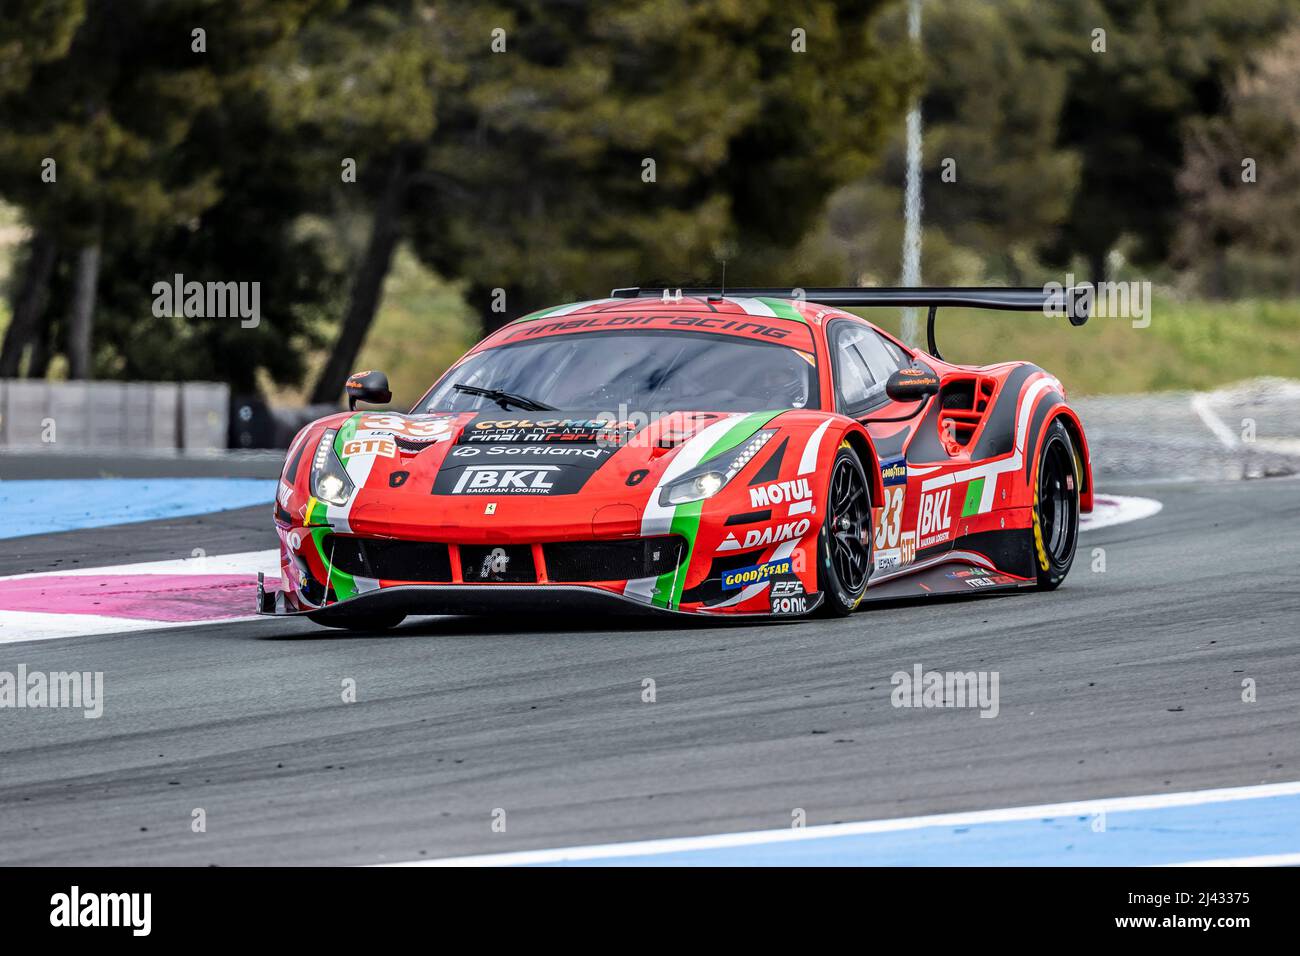 33 Crestani Fabrizio (ita), HOOK Christian (ger), TUNJO Oscar (col), Rinaldi Racing, Ferrari 488 GTE, action during the Official Prologue of the 2022 ELMS European Le Mans Series on the Paul Ricard circuit from April 11 to 12, in Le Castellet, France - Photo Marc de Mattia / DPPI Stock Photo